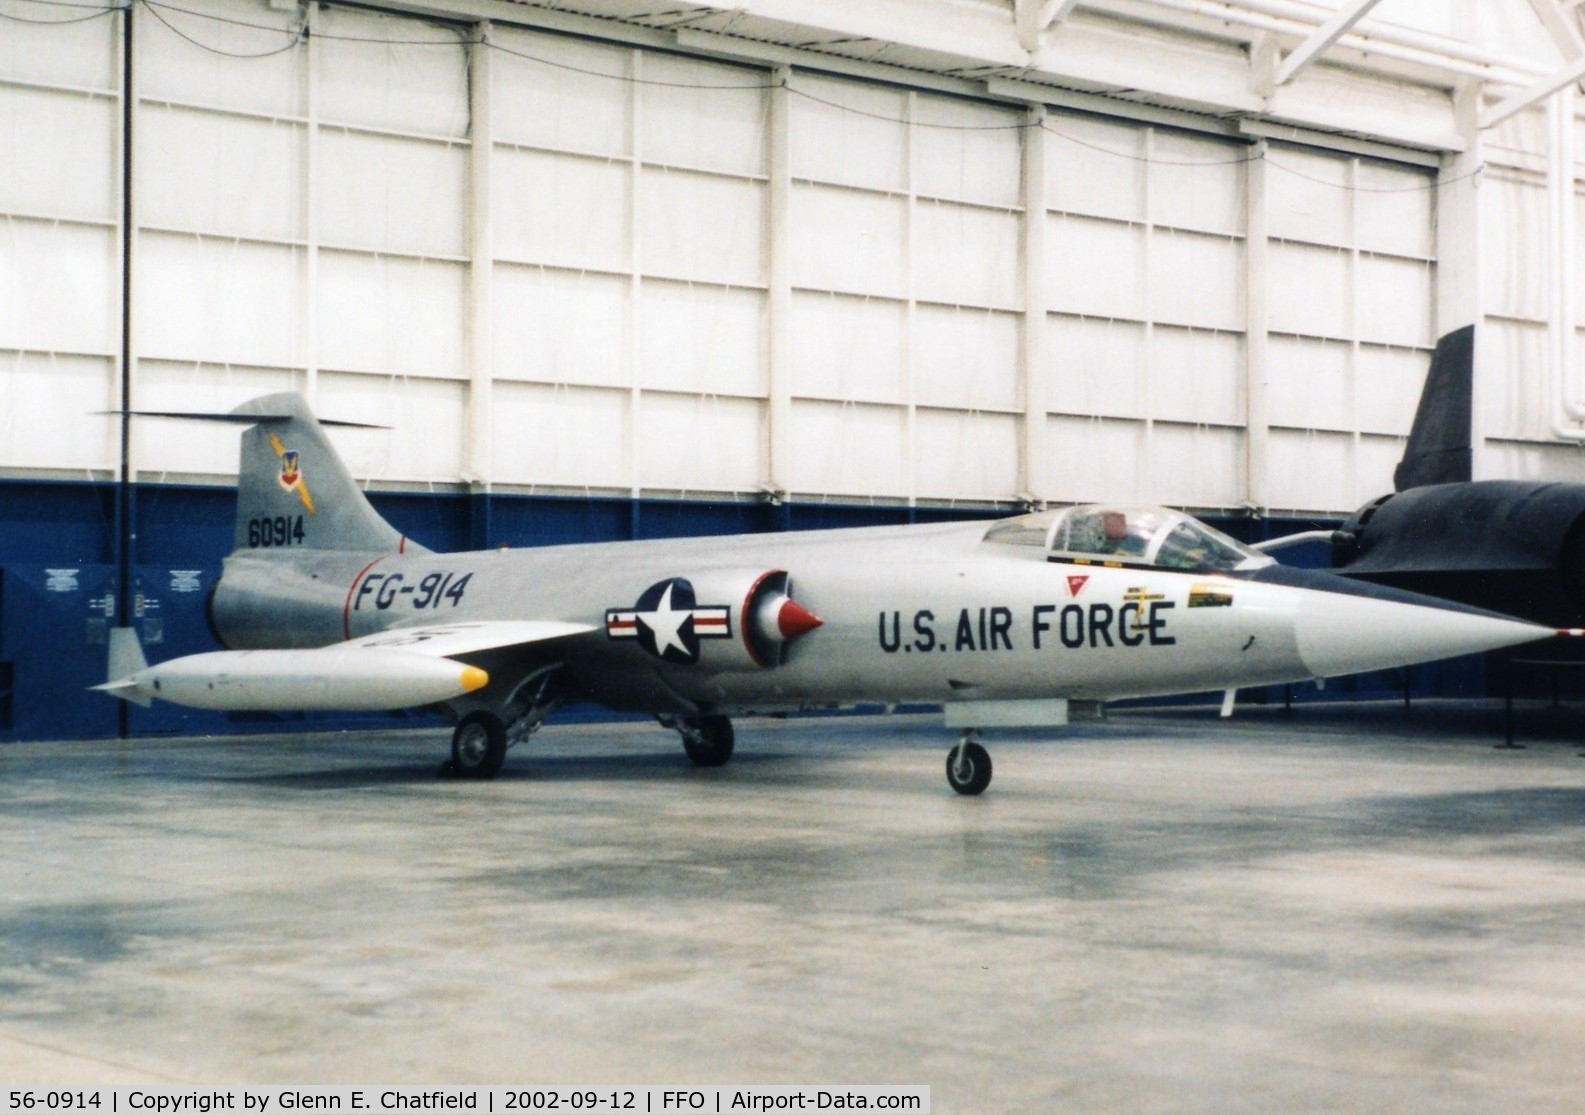 56-0914, 1956 Lockheed F-104C Starfighter C/N 383-1202, F-104C at the National Museum of the U.S. Air Force